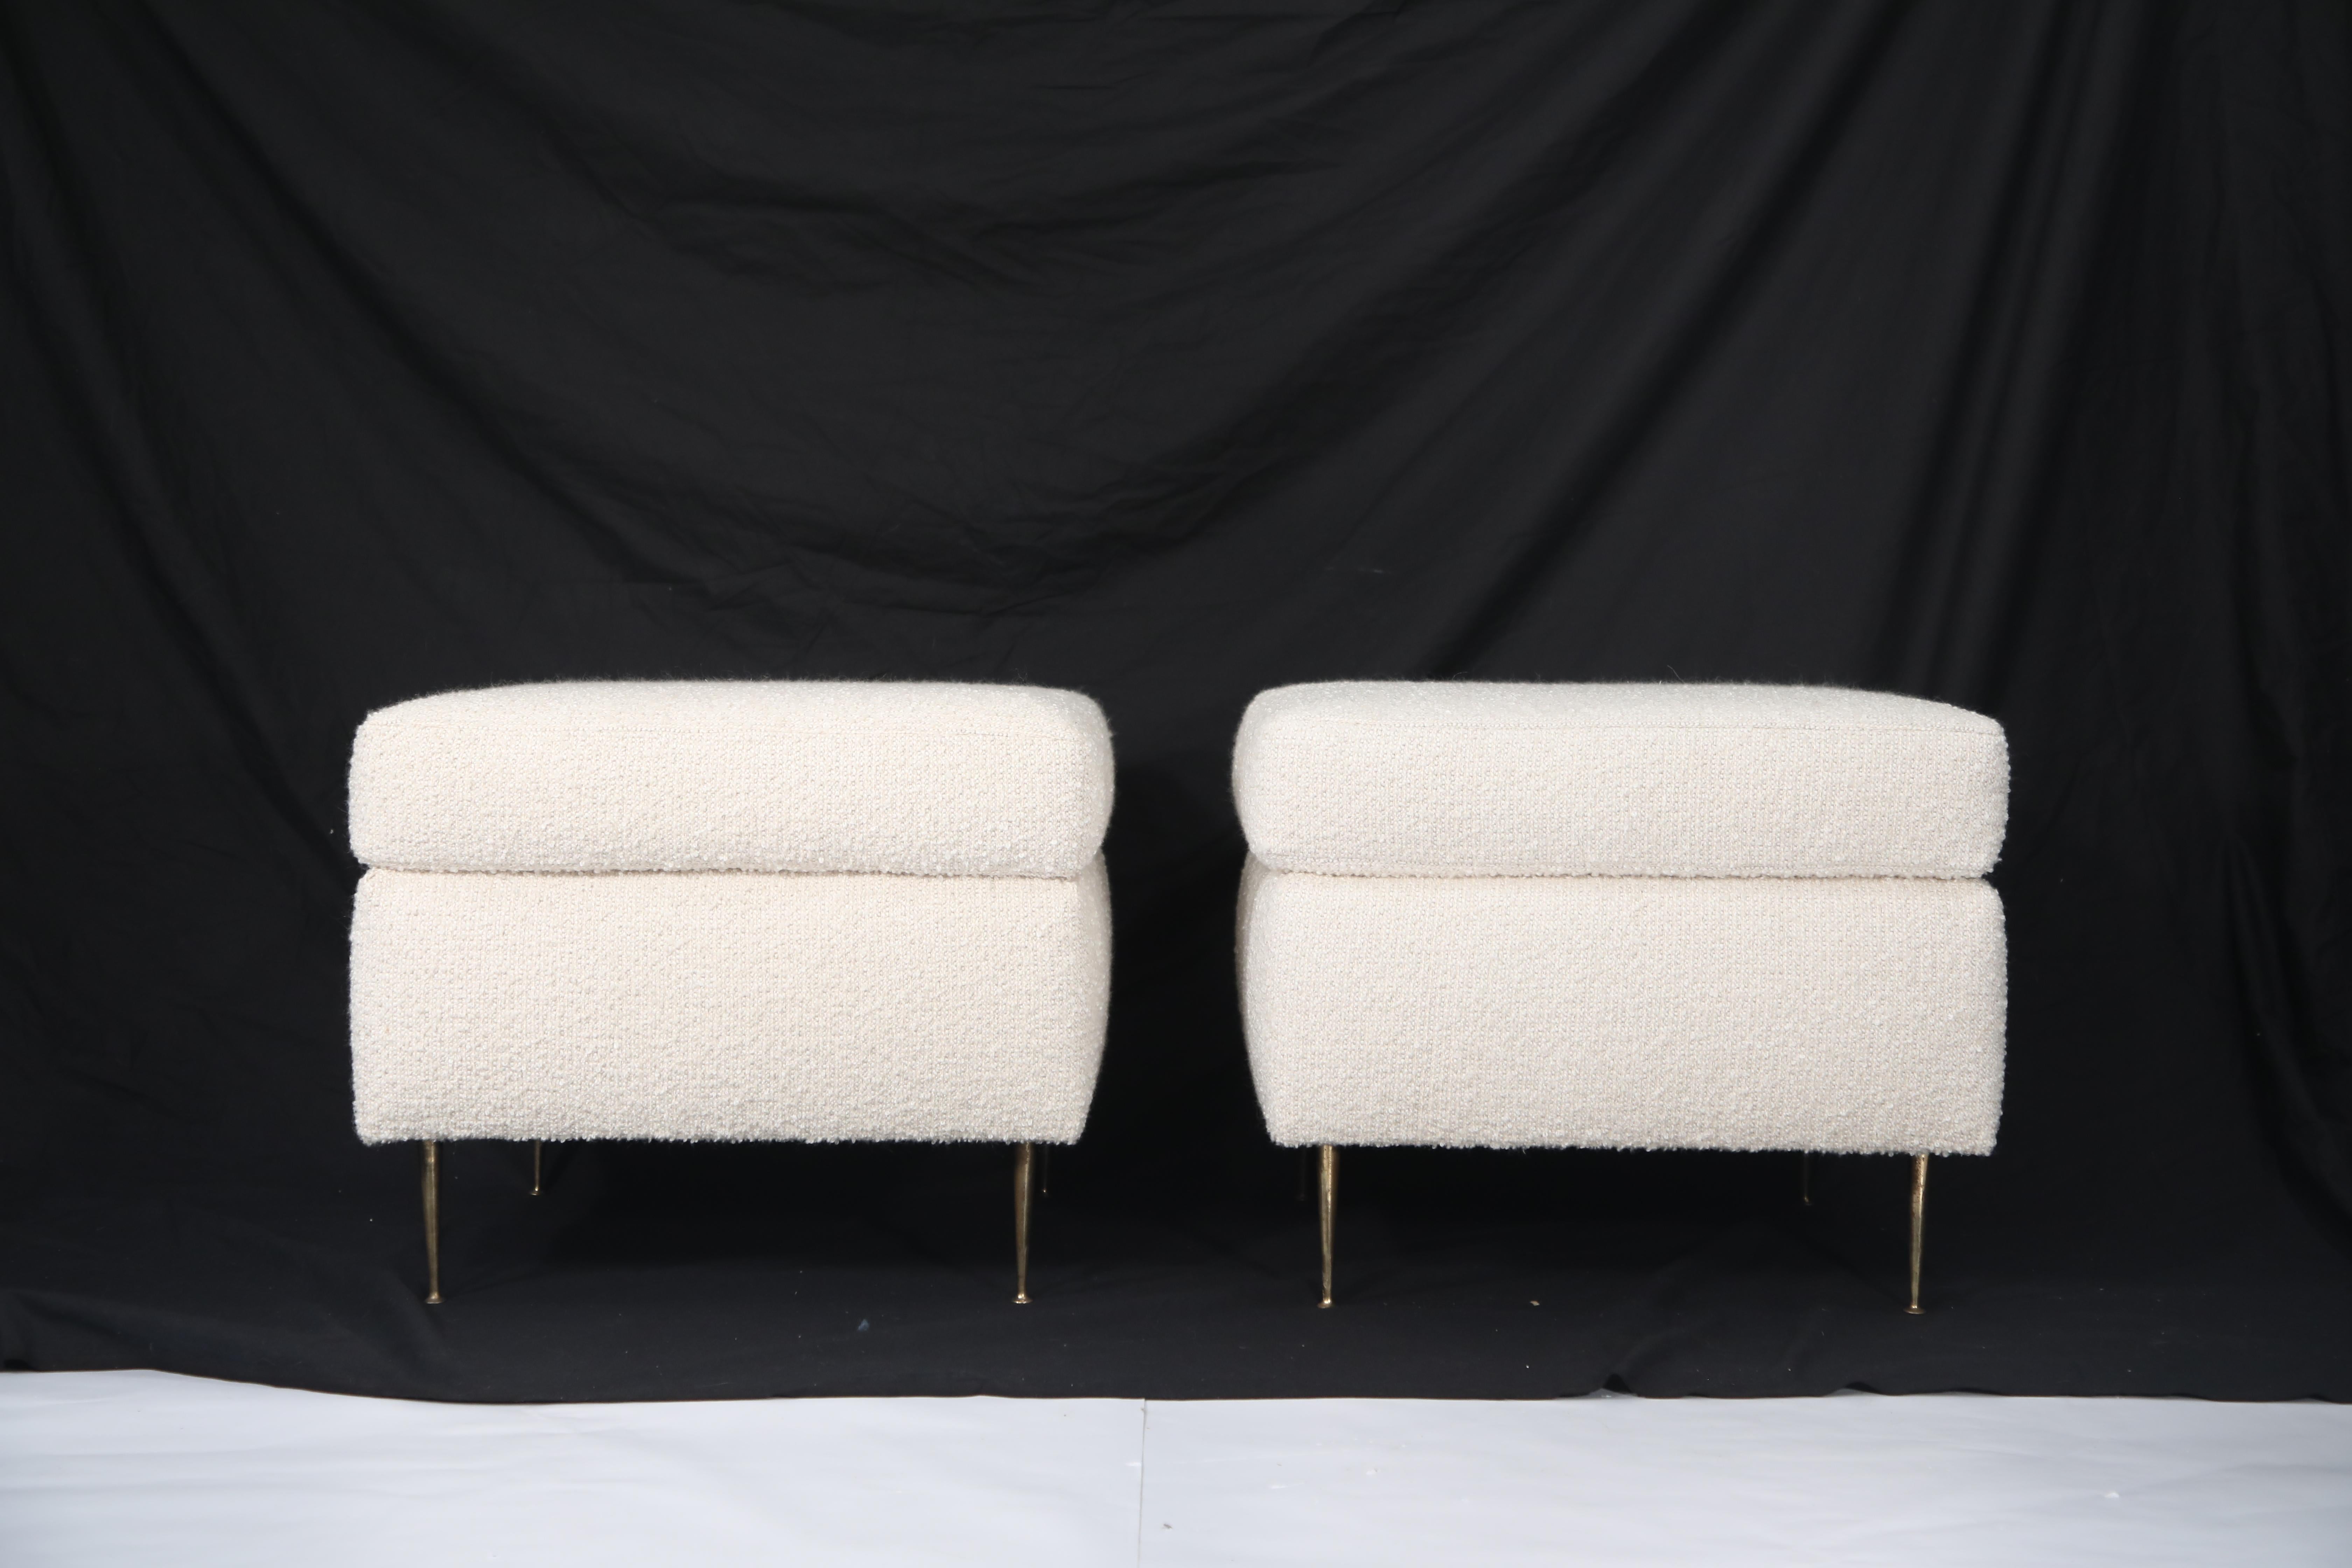 A gorgeous pair of Italian Mid-Century Modern white bouclé ottomans on brass legs. This magnificent pair of poufs are designer on-trend and ready to be used immediately. Completely restored, the white nubby bouclé is beautiful and the brass legs on